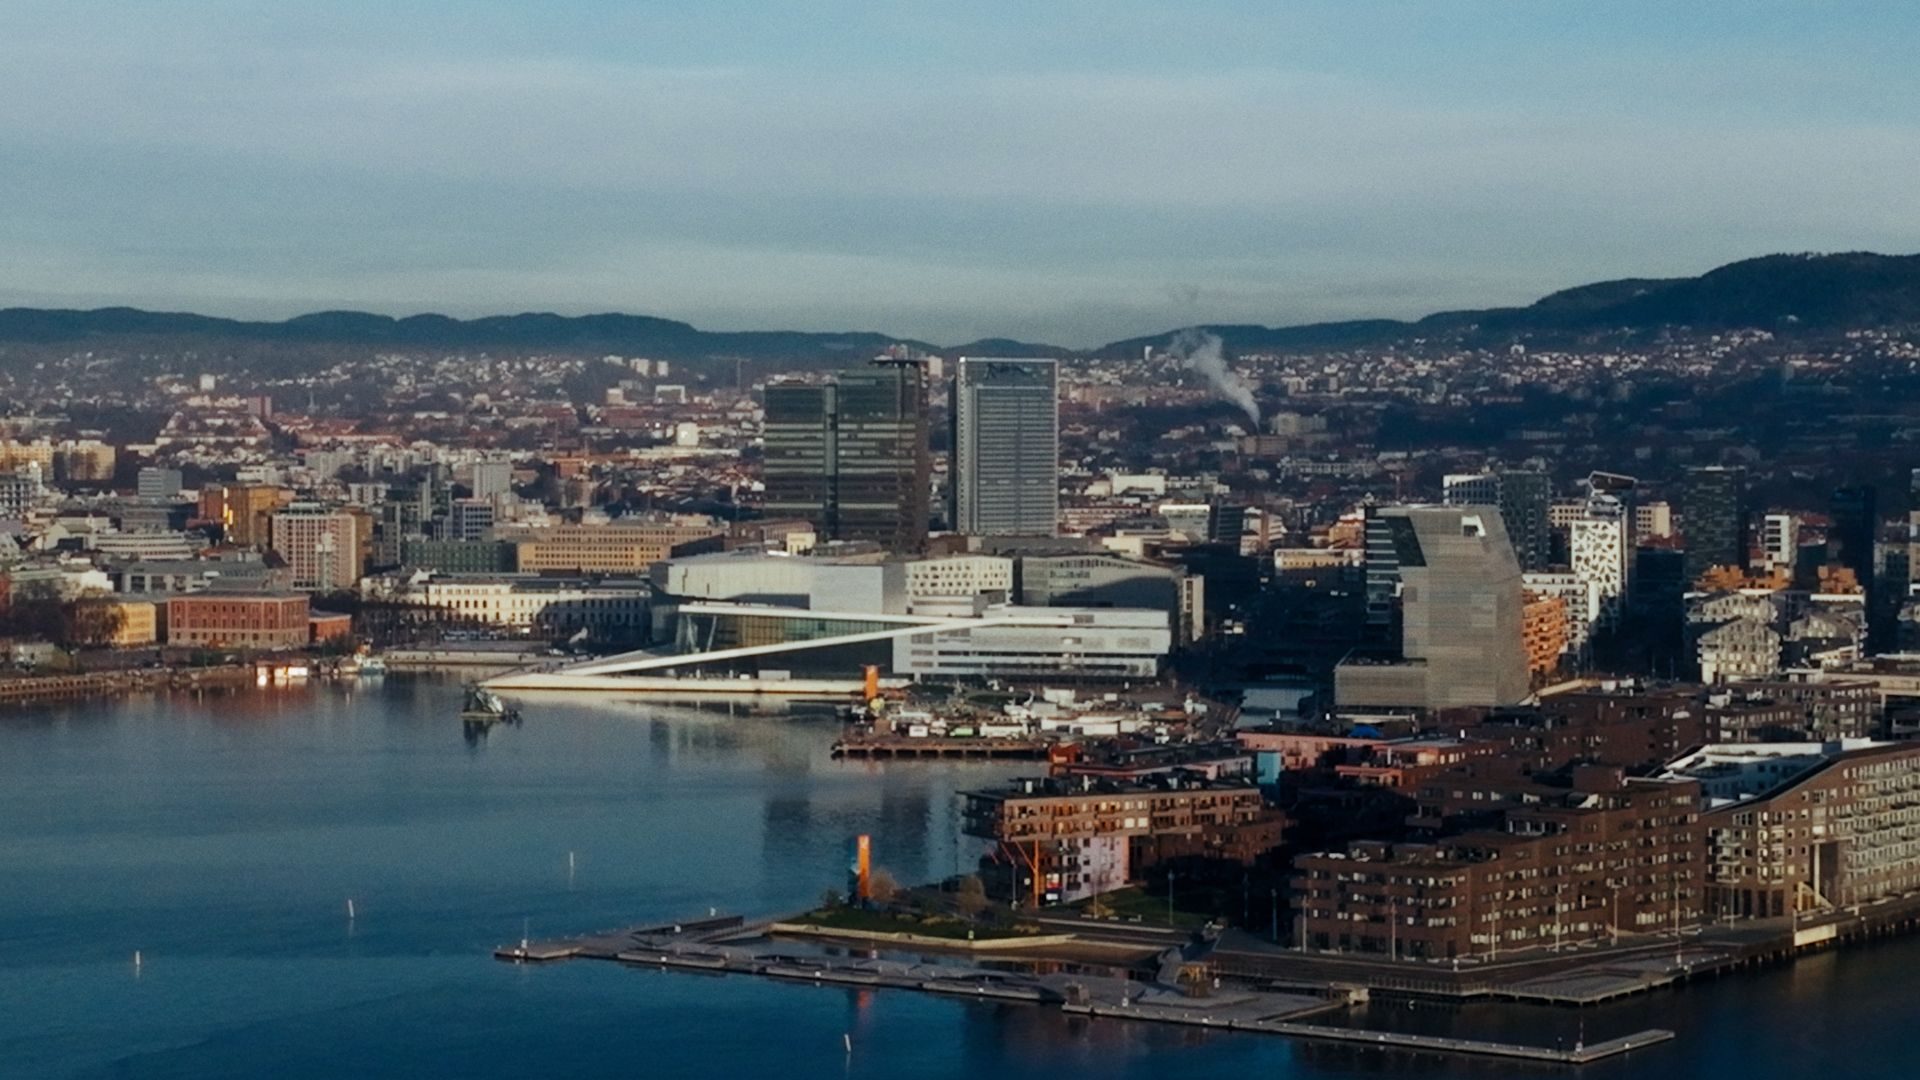 Overview of Oslo harbour